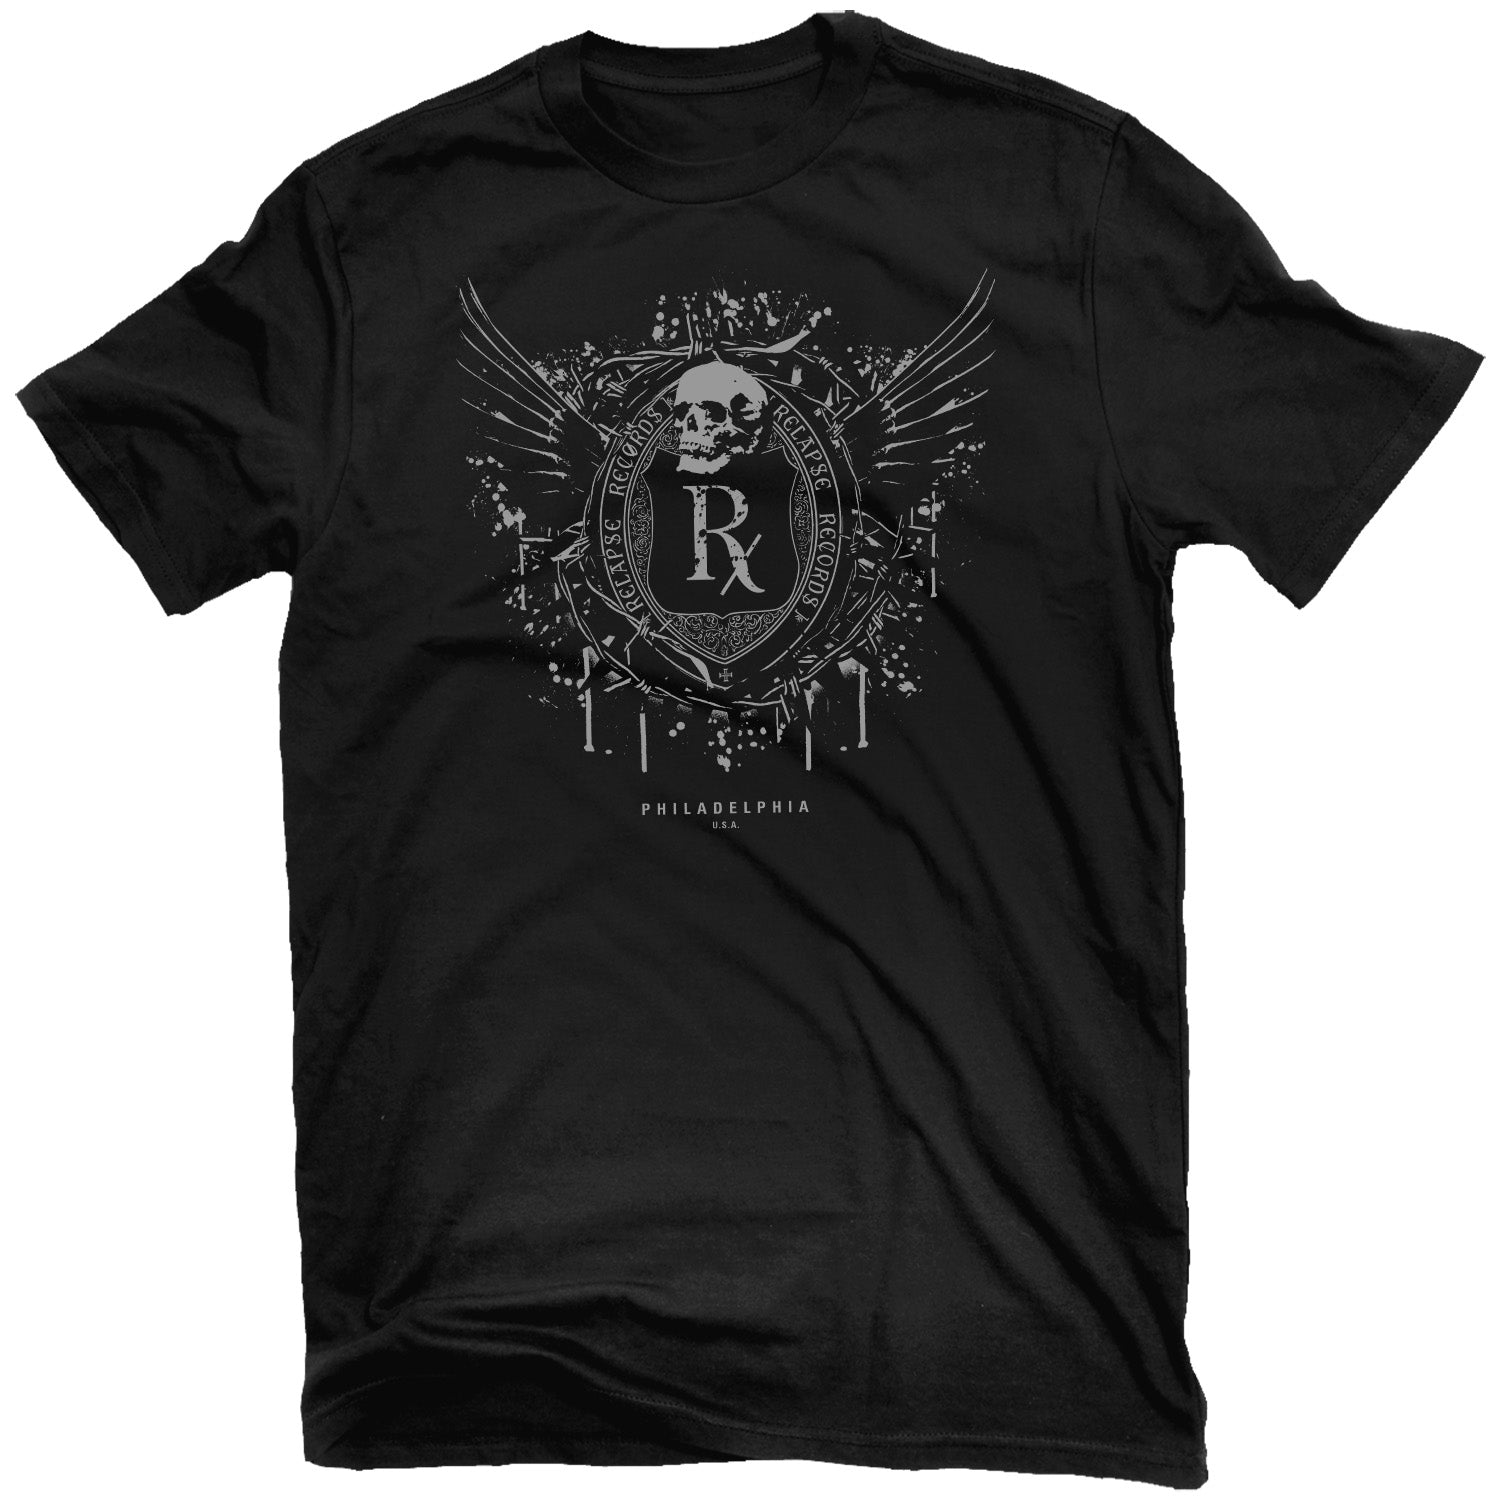 Relapse Records "Deathshield" T-Shirt